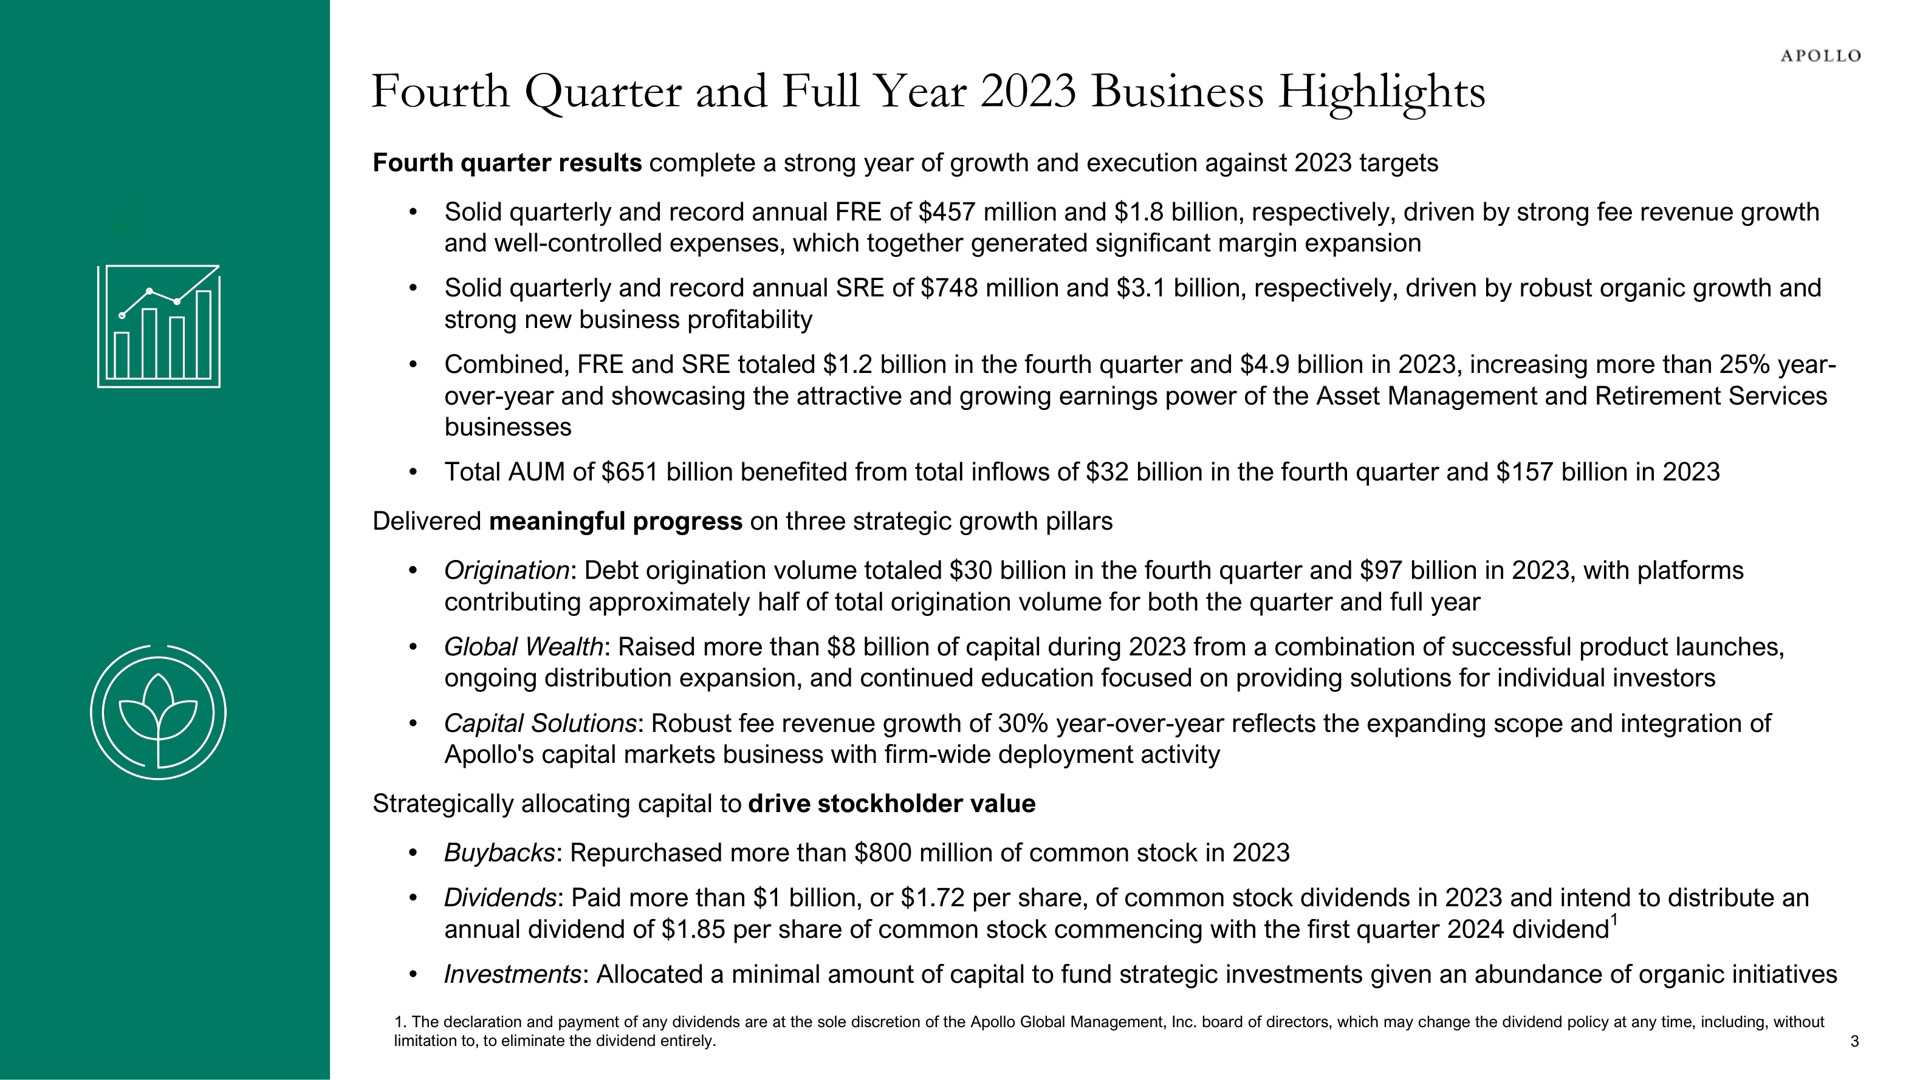 fourth quarter and full year business highlights | Apollo Global Management